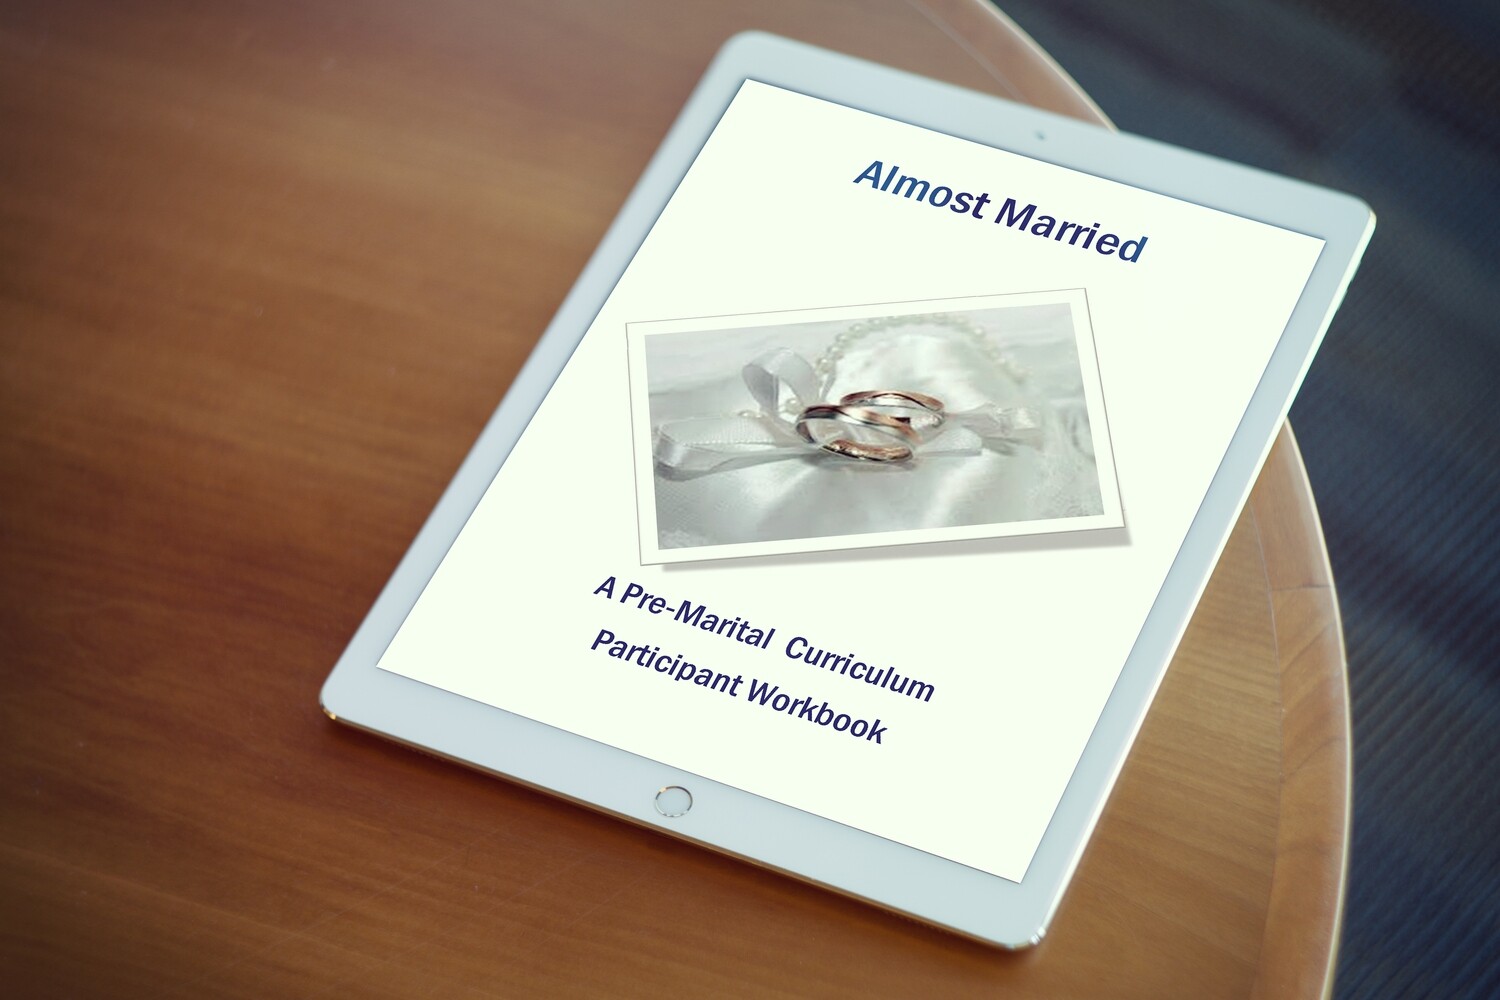 Almost Married Participant Workbook